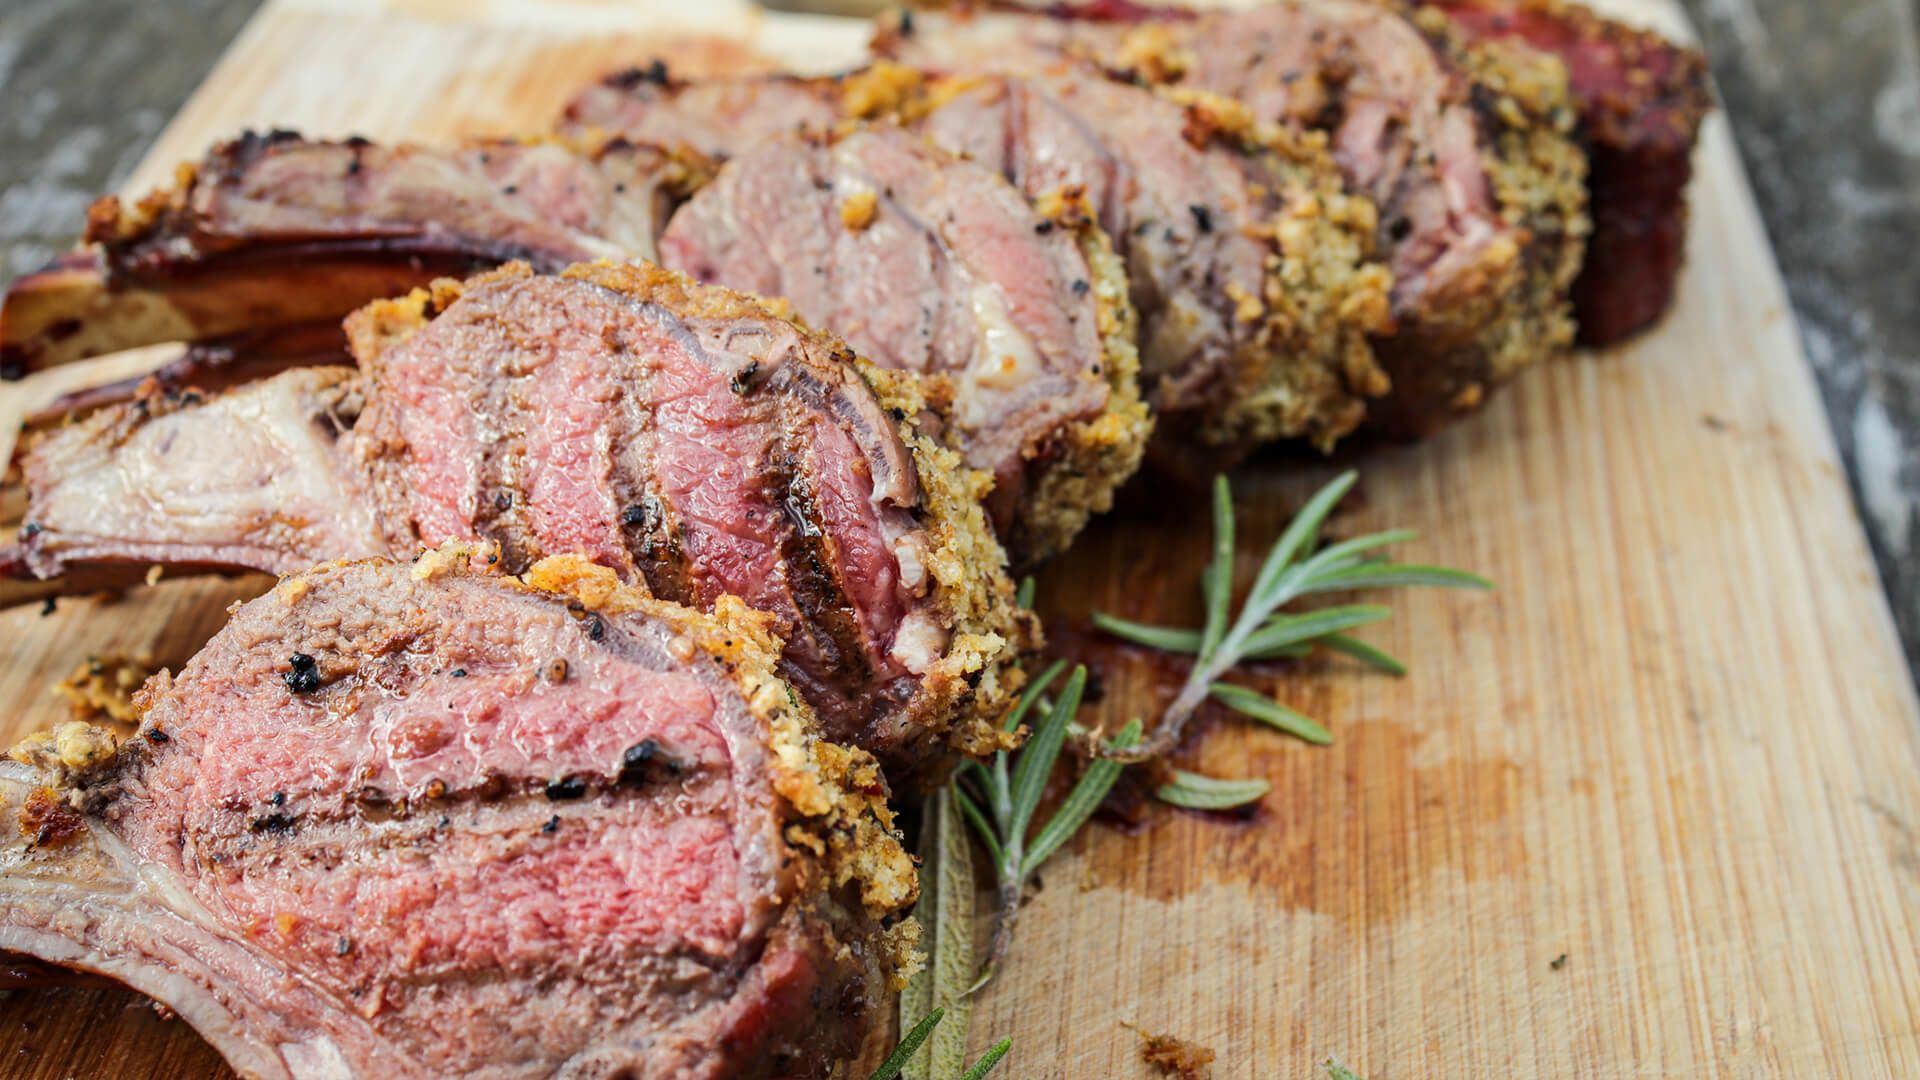 Mustard and Herb Crumbed Rack of Lamb